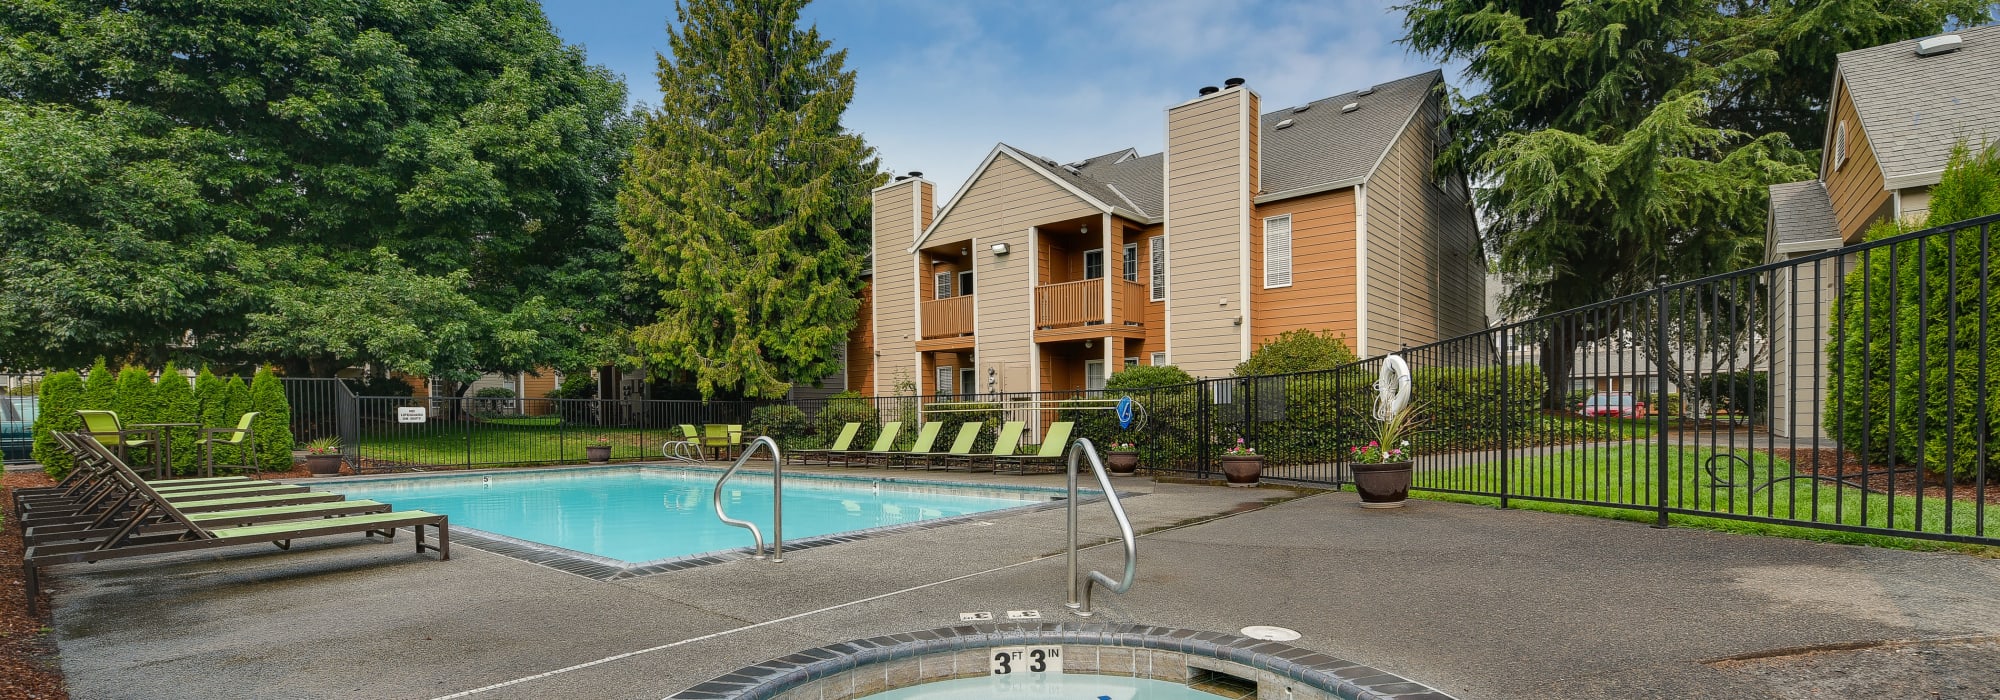 Photos of Carriage House Apartments in Vancouver, Washington